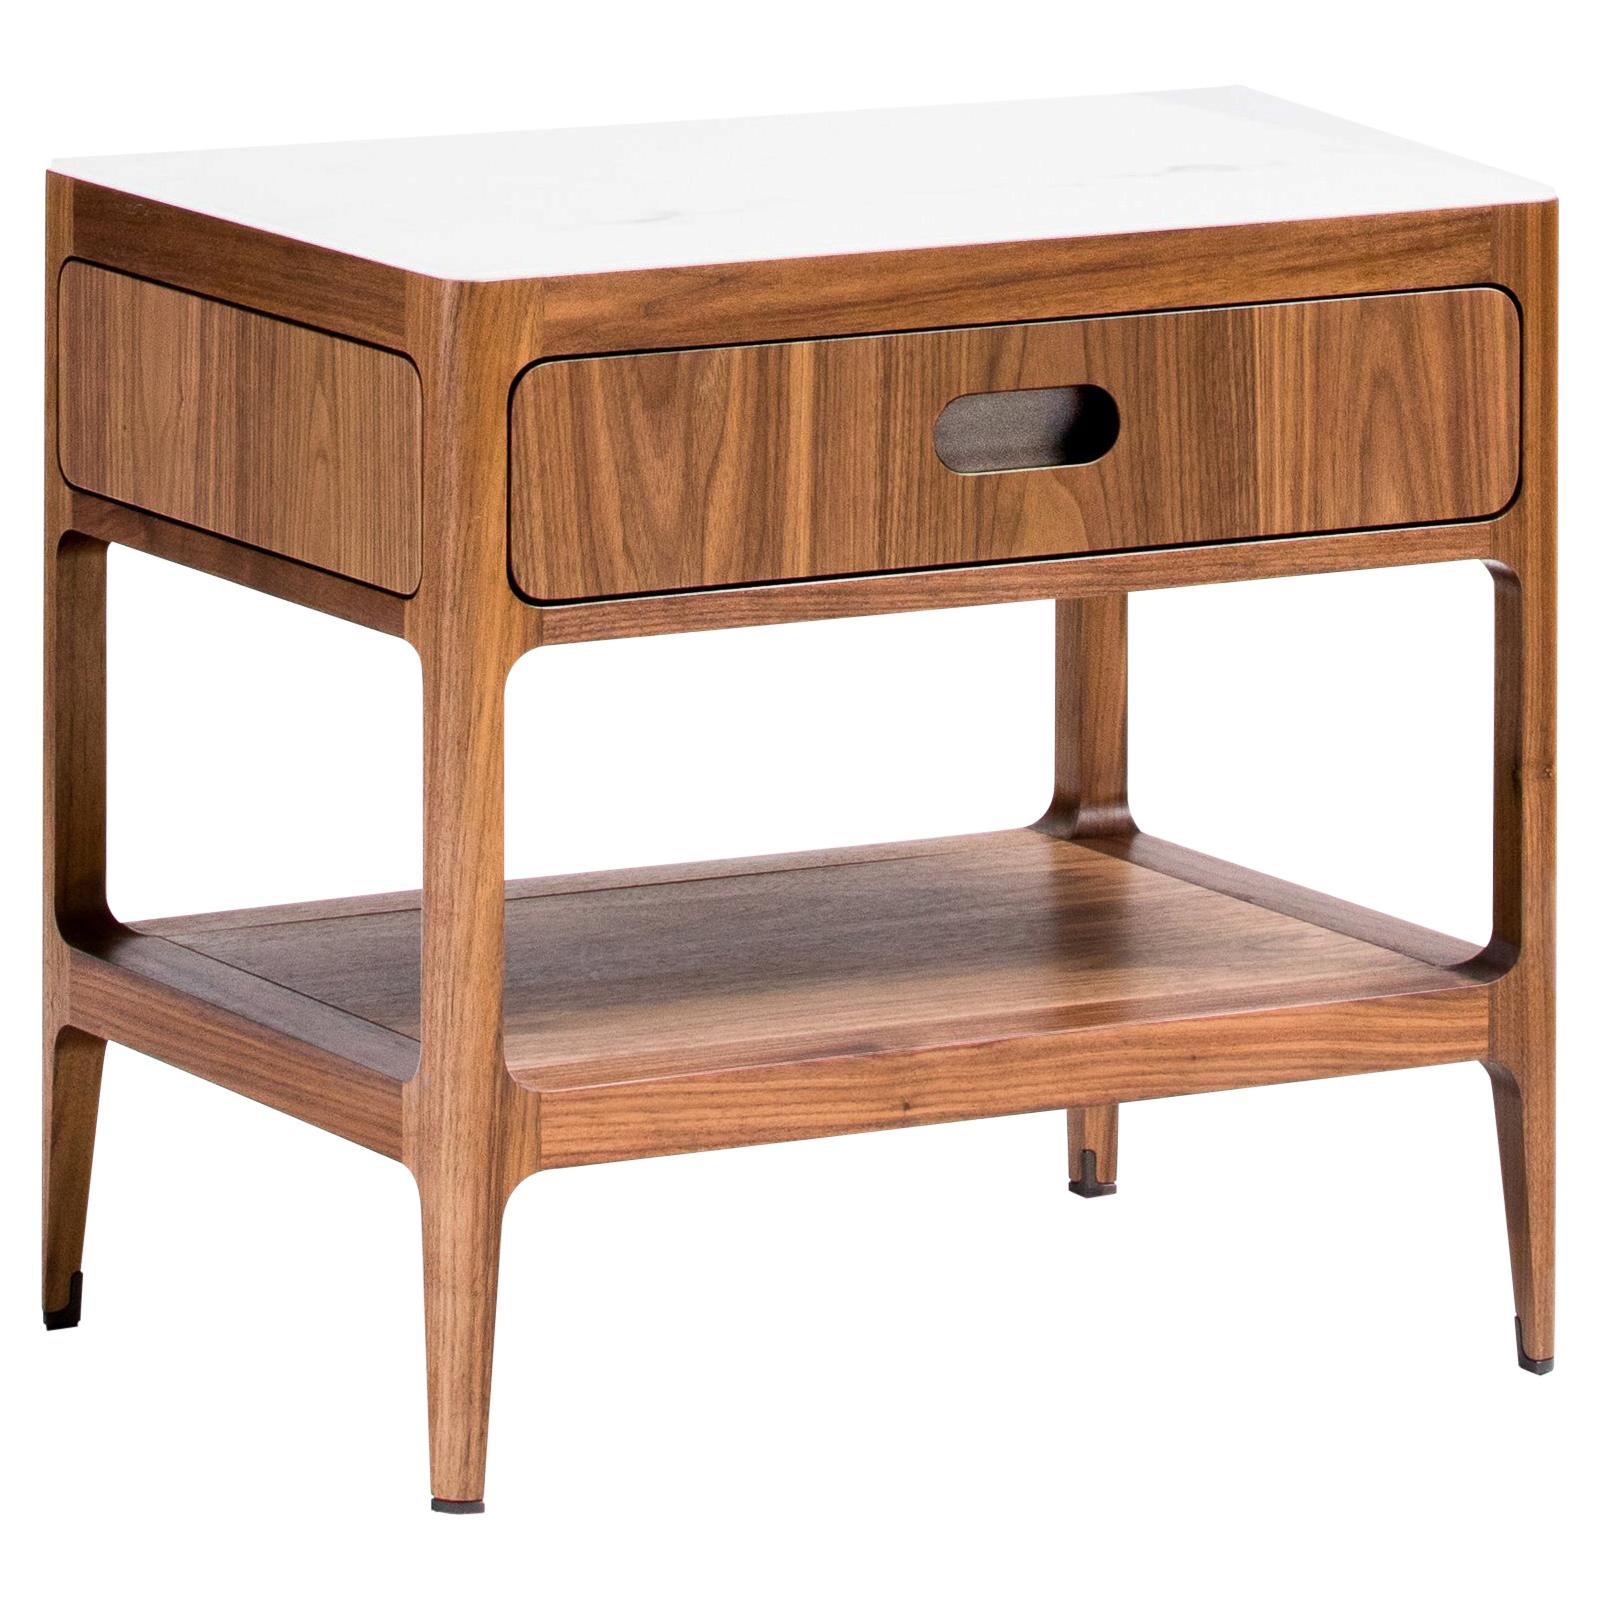 Customizable End Table or Nightstand with Drawer and Shelf by Munson Furniture im Angebot